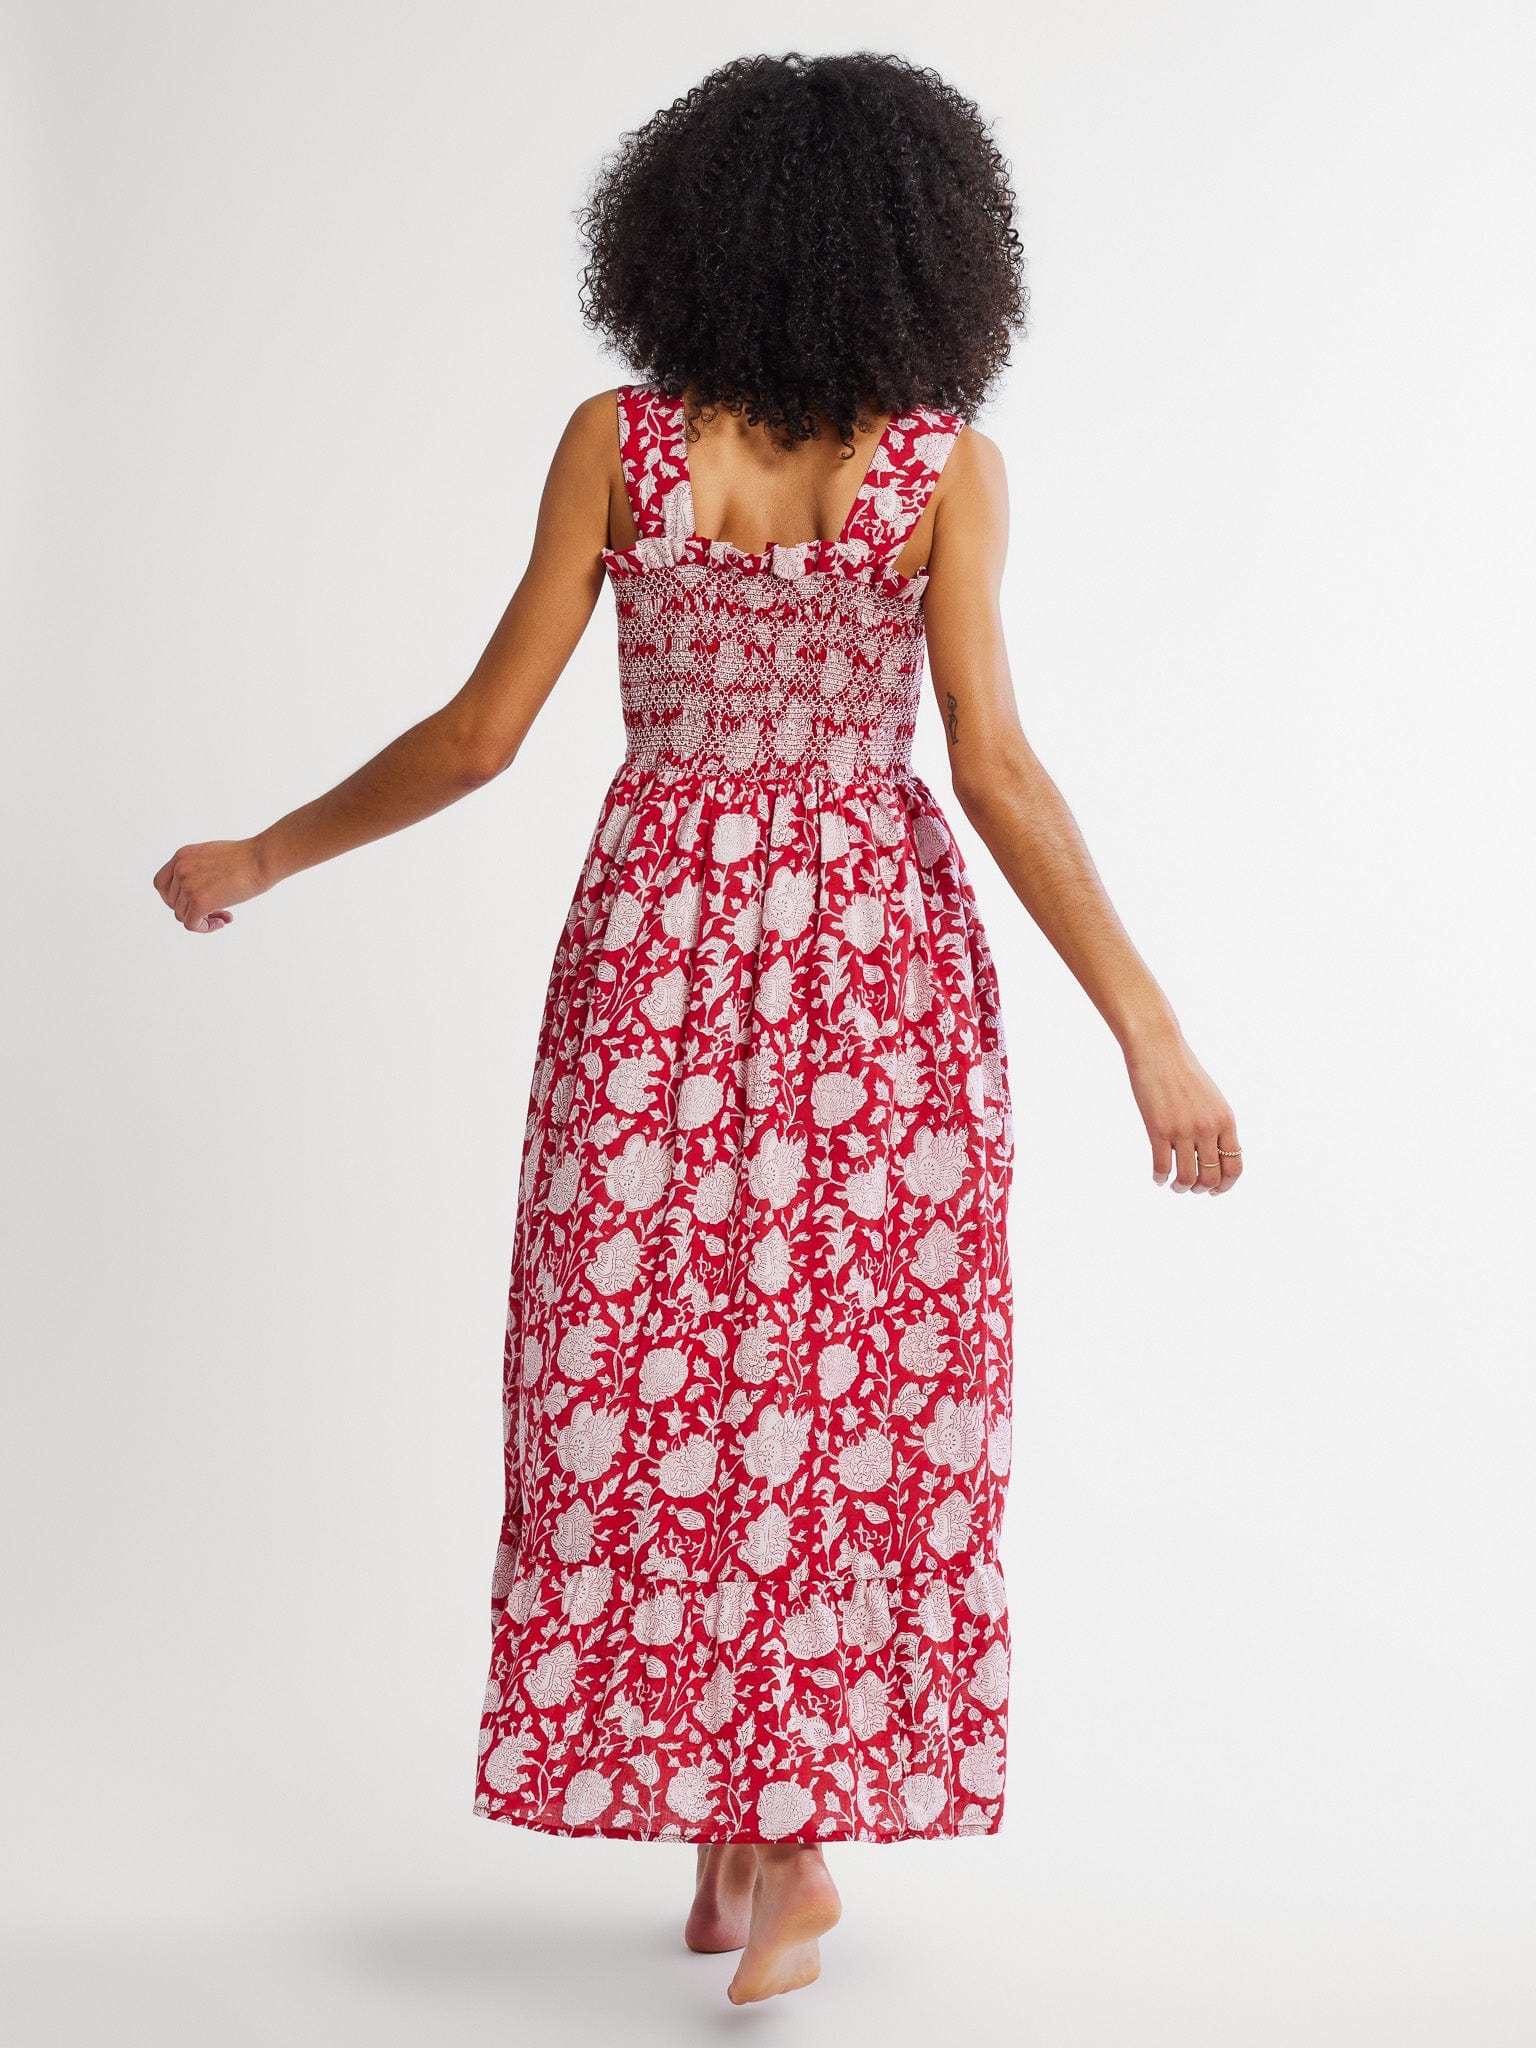 MILLE Clothing Garden Dress in Red Zinnia